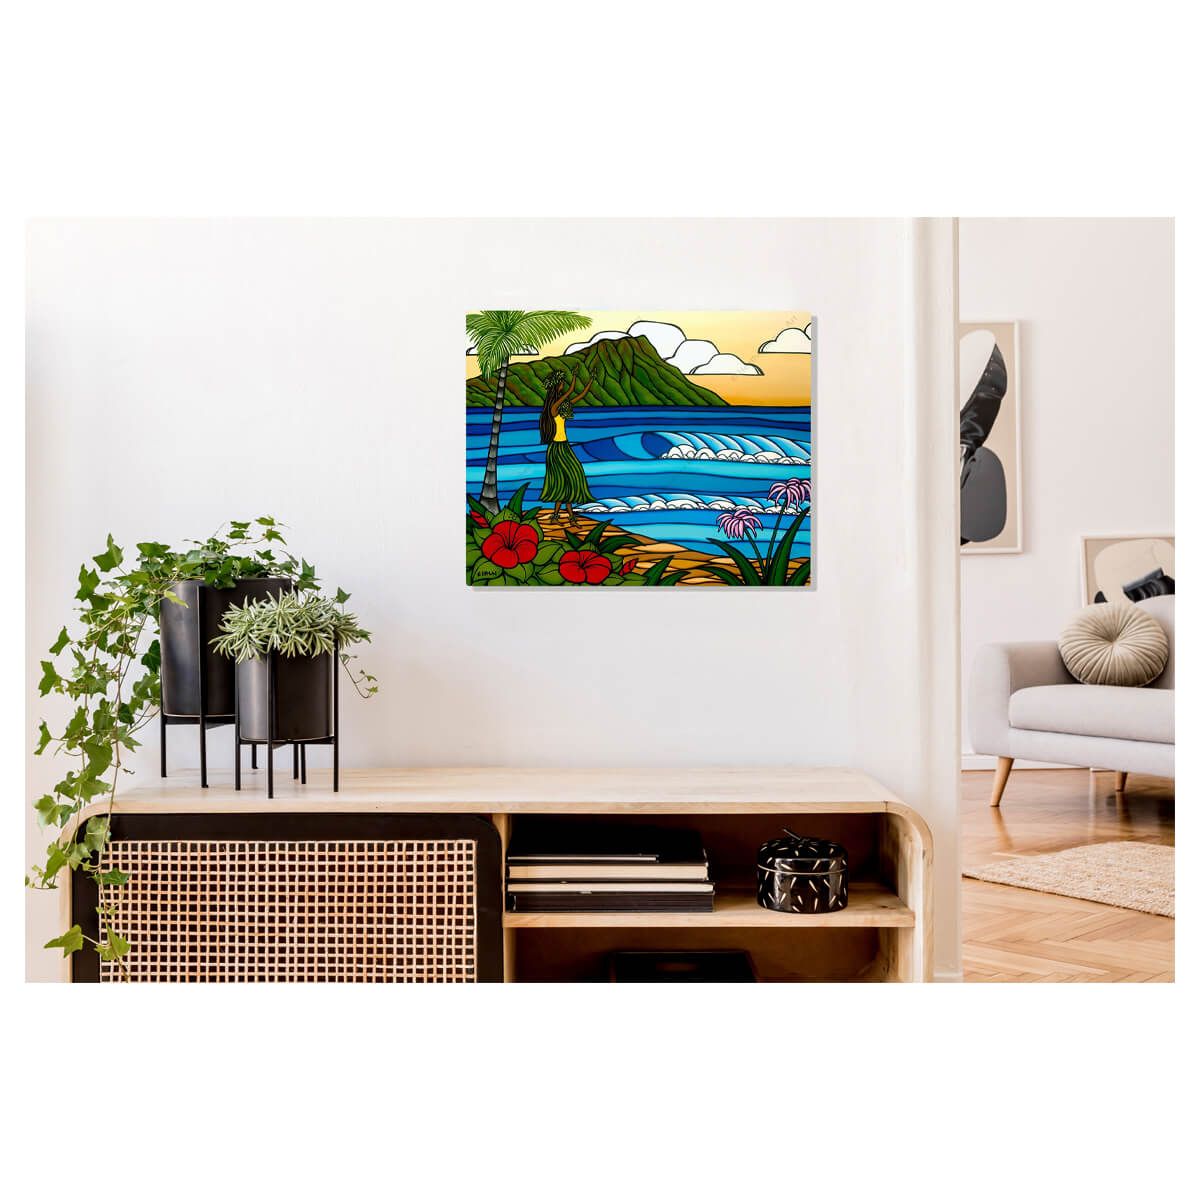 A metal art print featuring a Hawaiian hula girl dancing on the beach with a backdrop of Diamond Head Crater, crashing blue waves, palm trees, tropical red flowers, & a sunset yellow sky by Hawaii surf artist Heather Brown